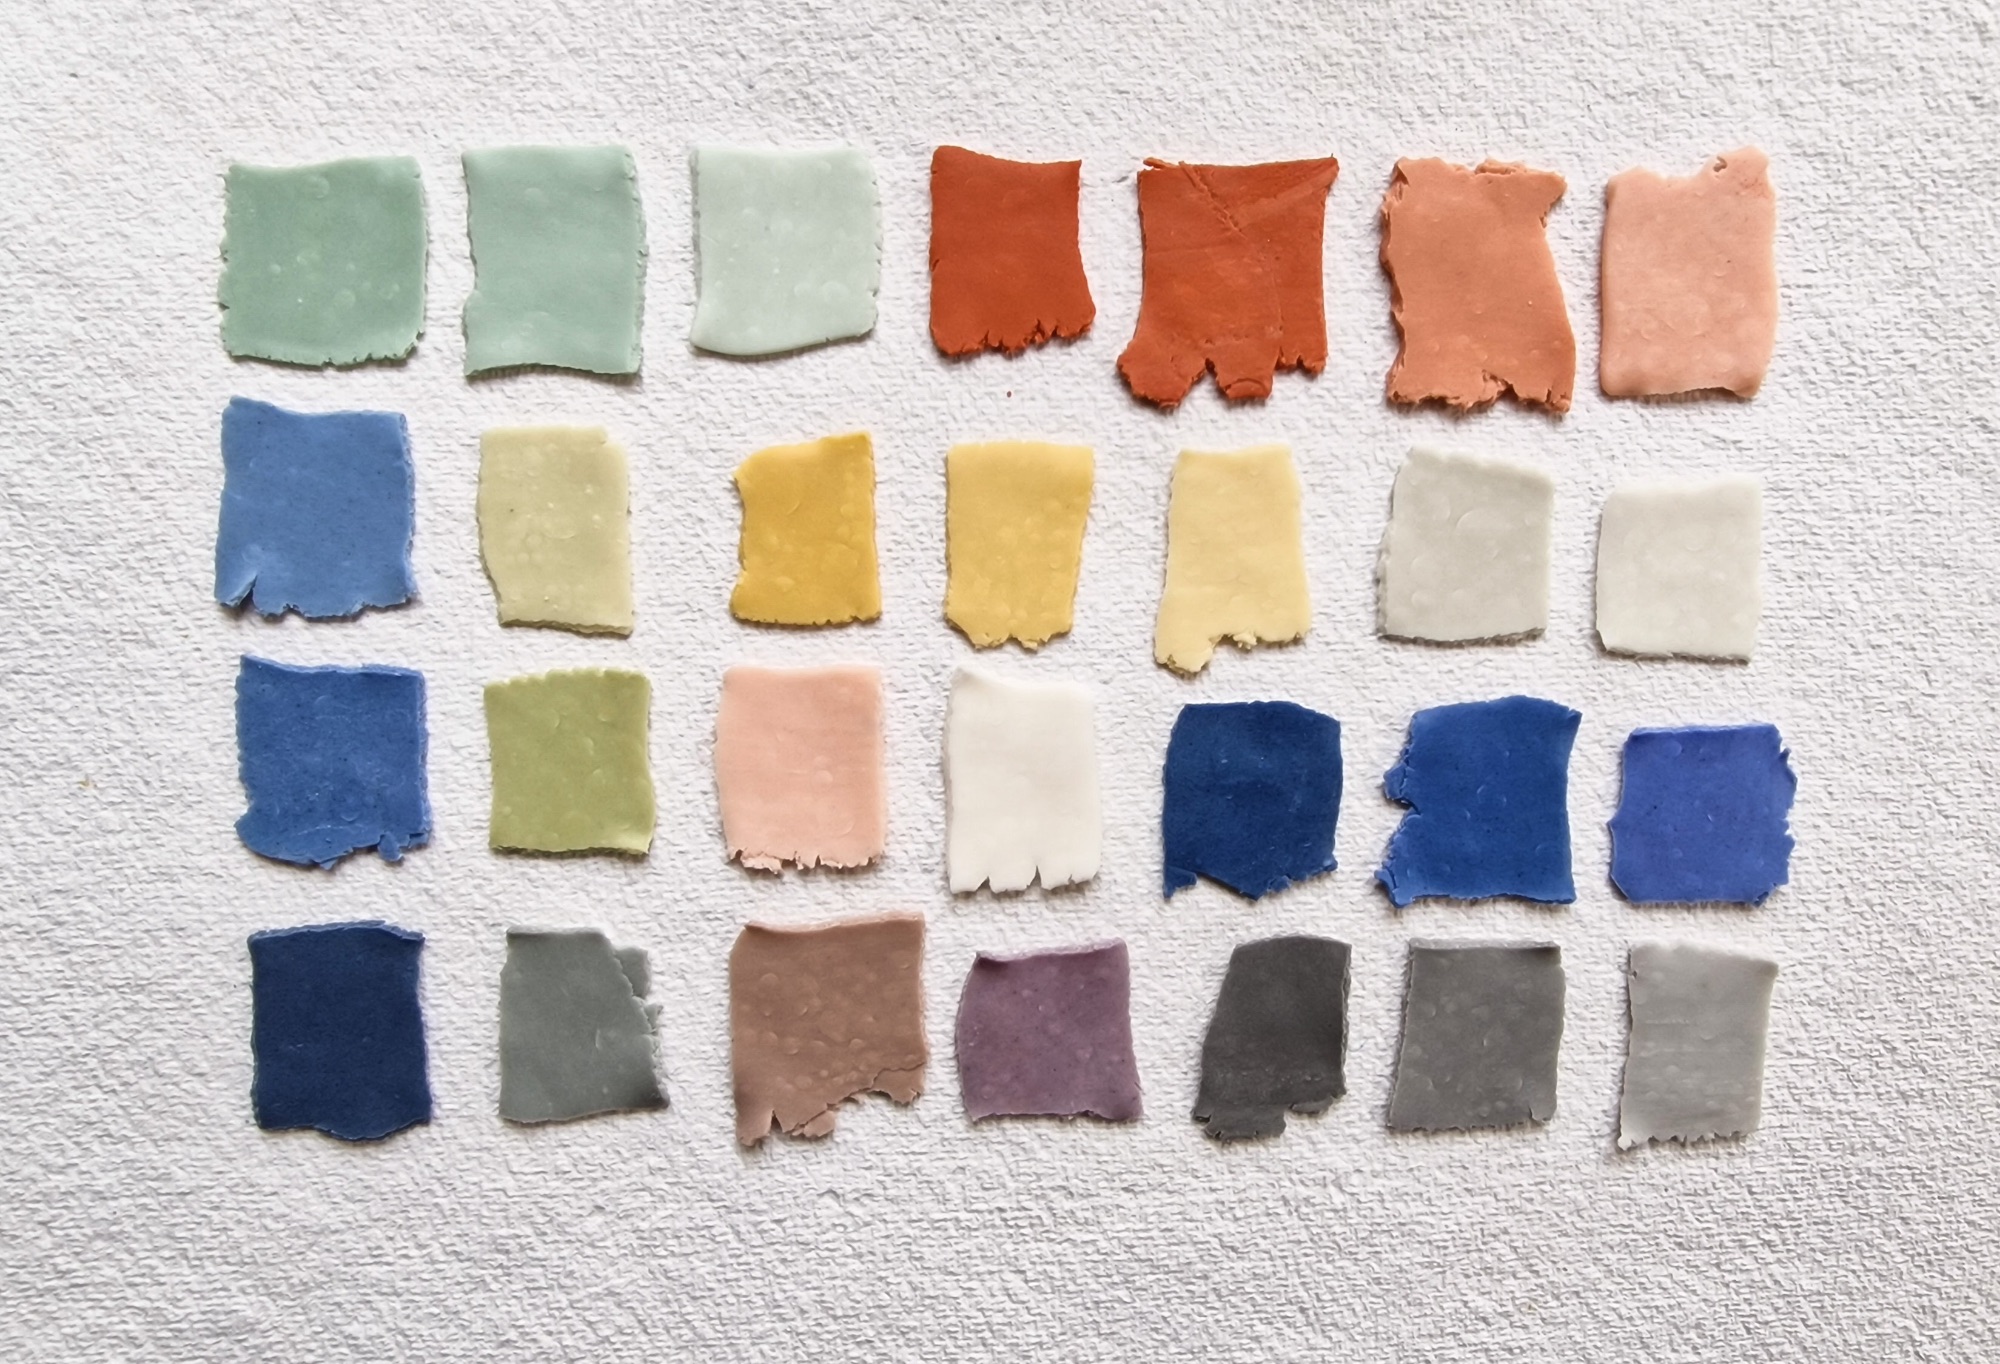 Colour swatches made from polymer clay and artists powdered pigments after baking